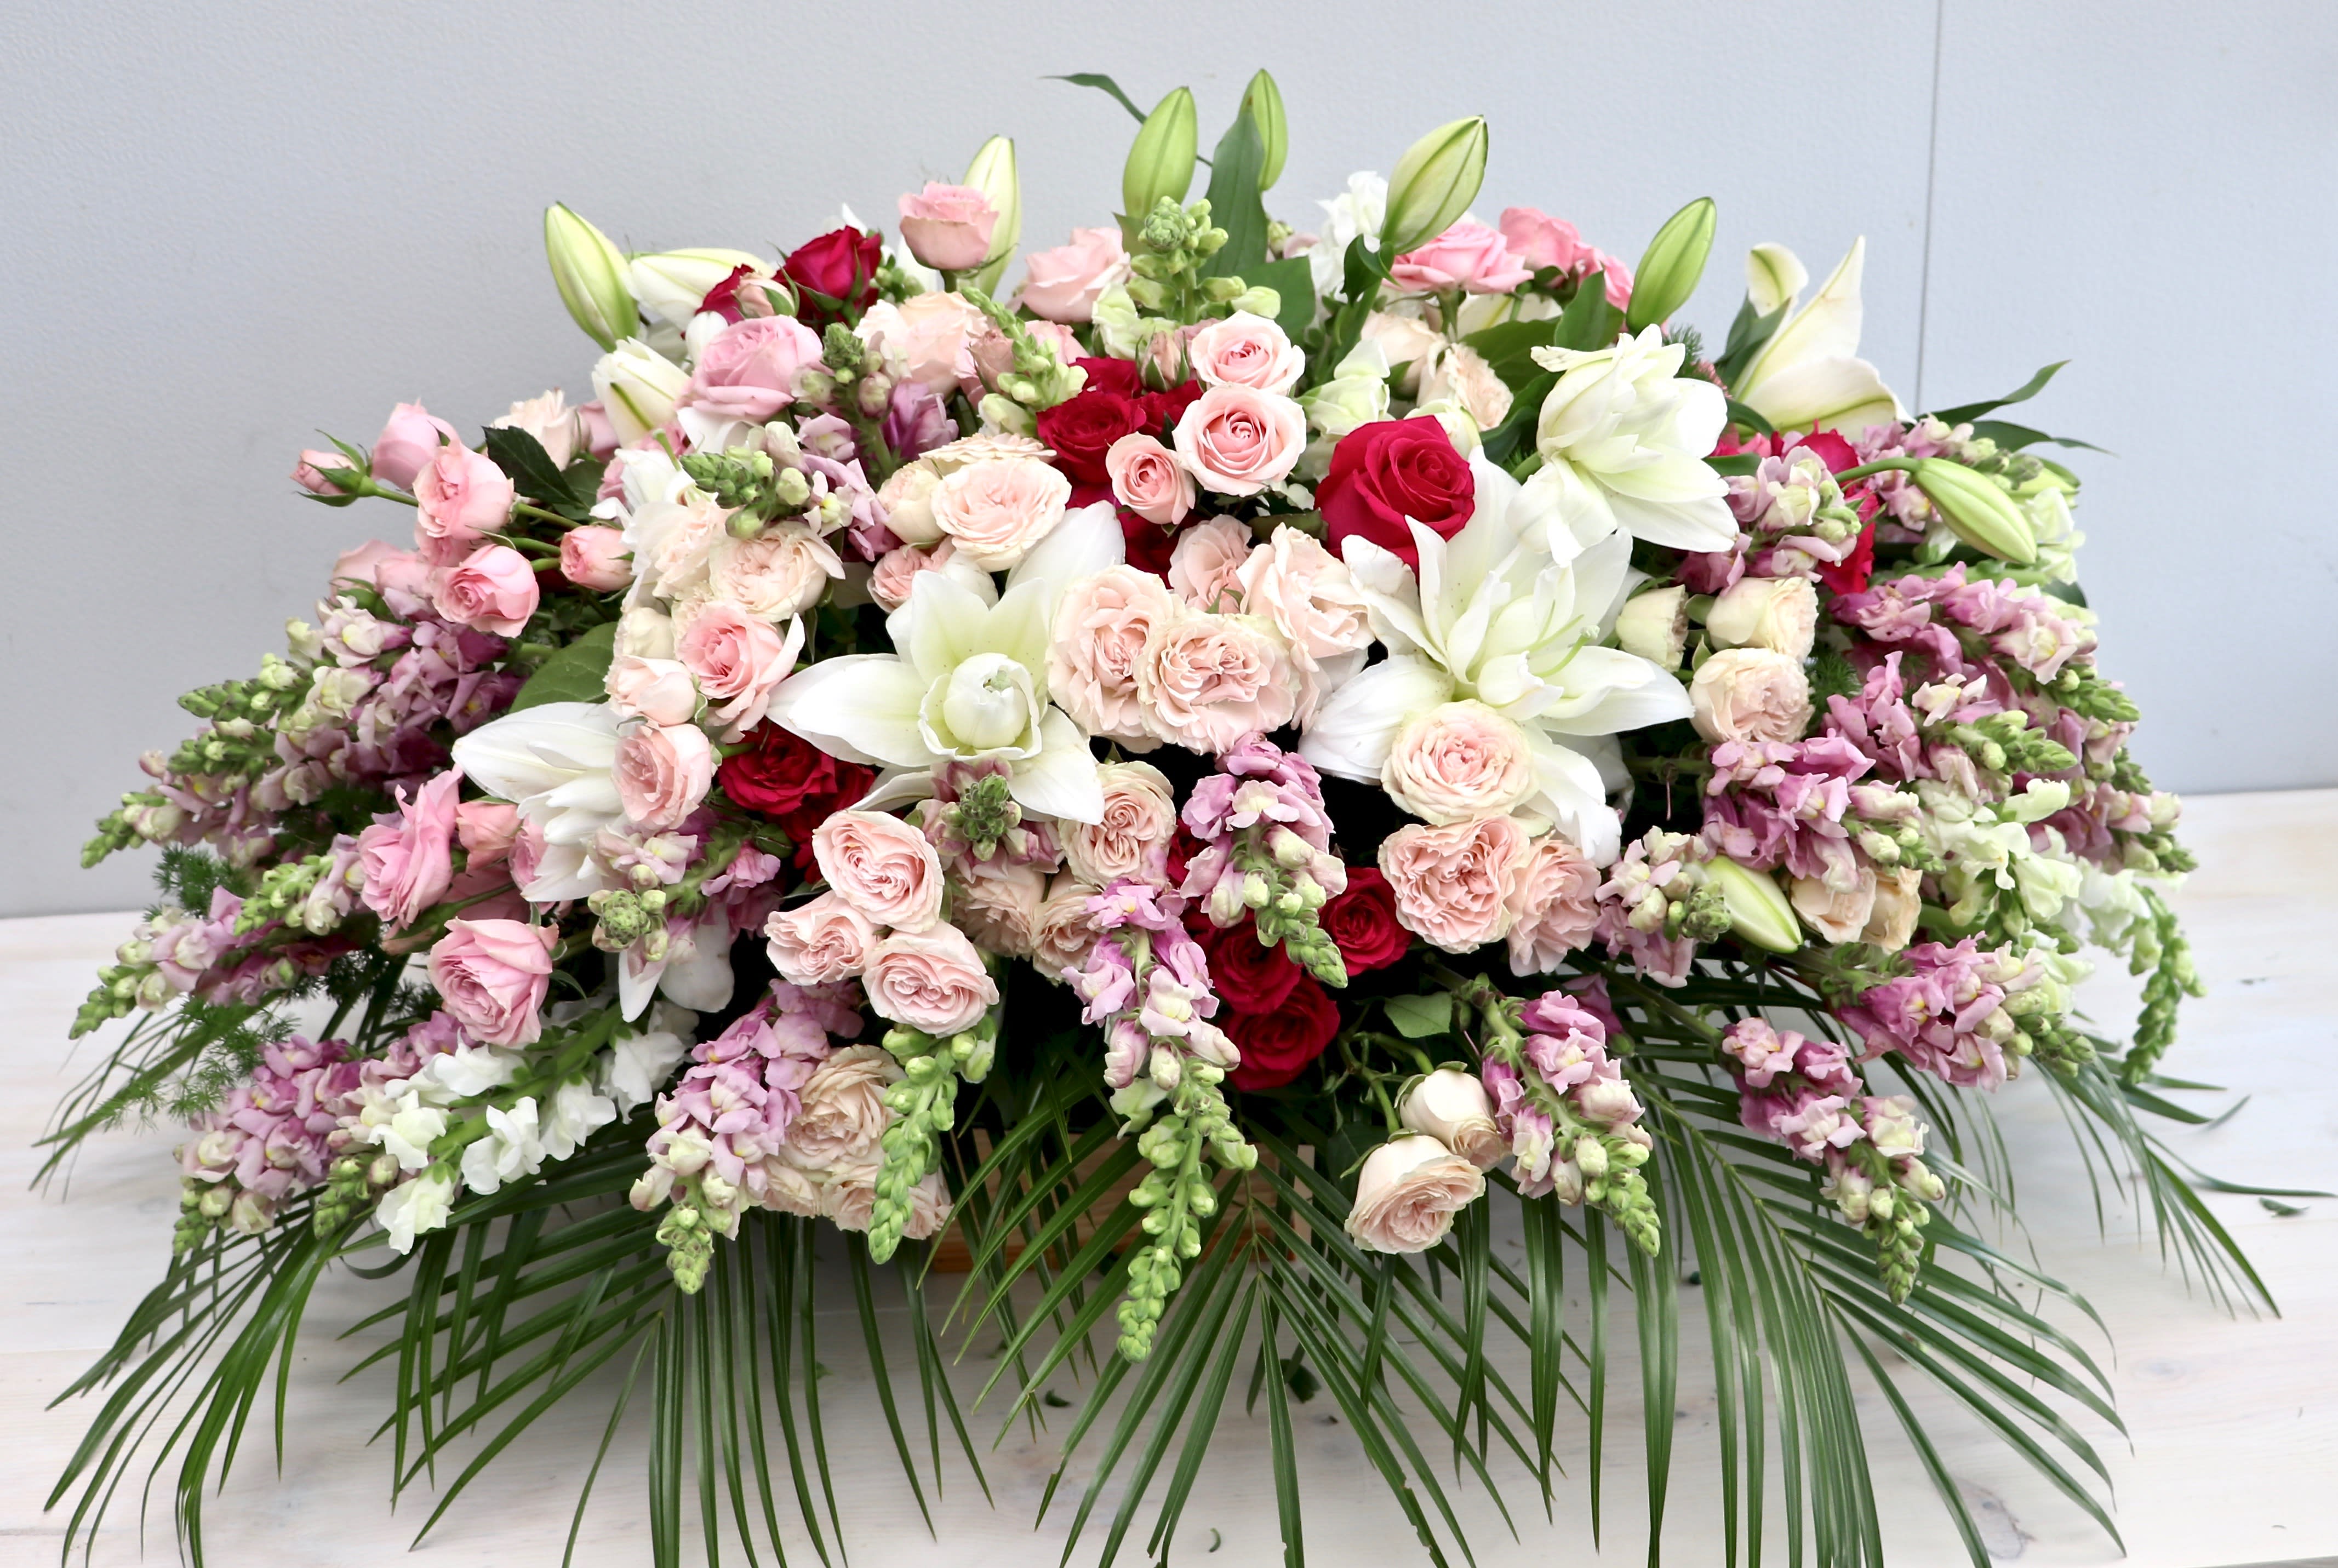 Pinks and White Casket - My Glendale Florist  - This casket arrangement is made with different hues of pink and white roses, stargazer lilies, and fragrant seasonal greens.